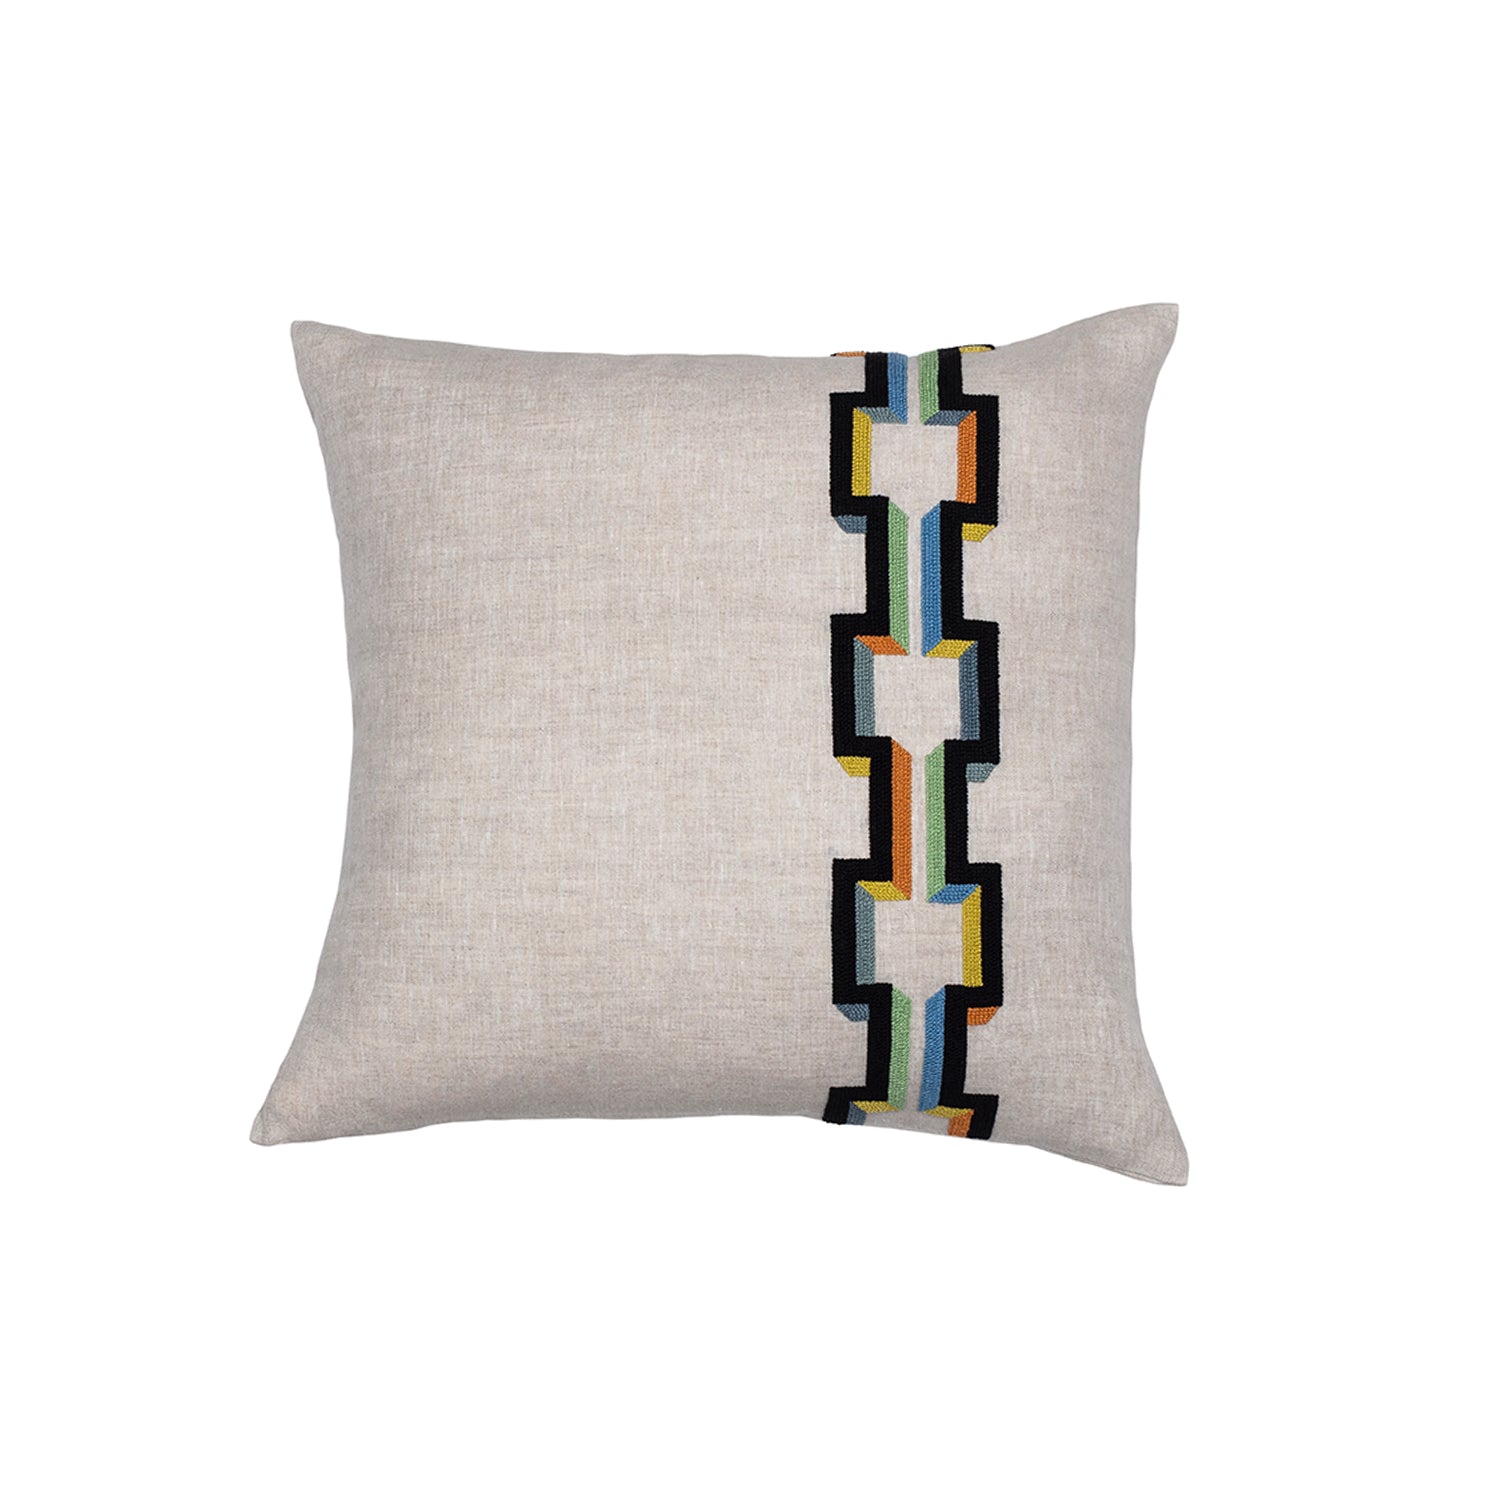 Square throw pillow with an off-center stripe of geometric embroidery in shades of black, orange, yellow and blue on a greige field.